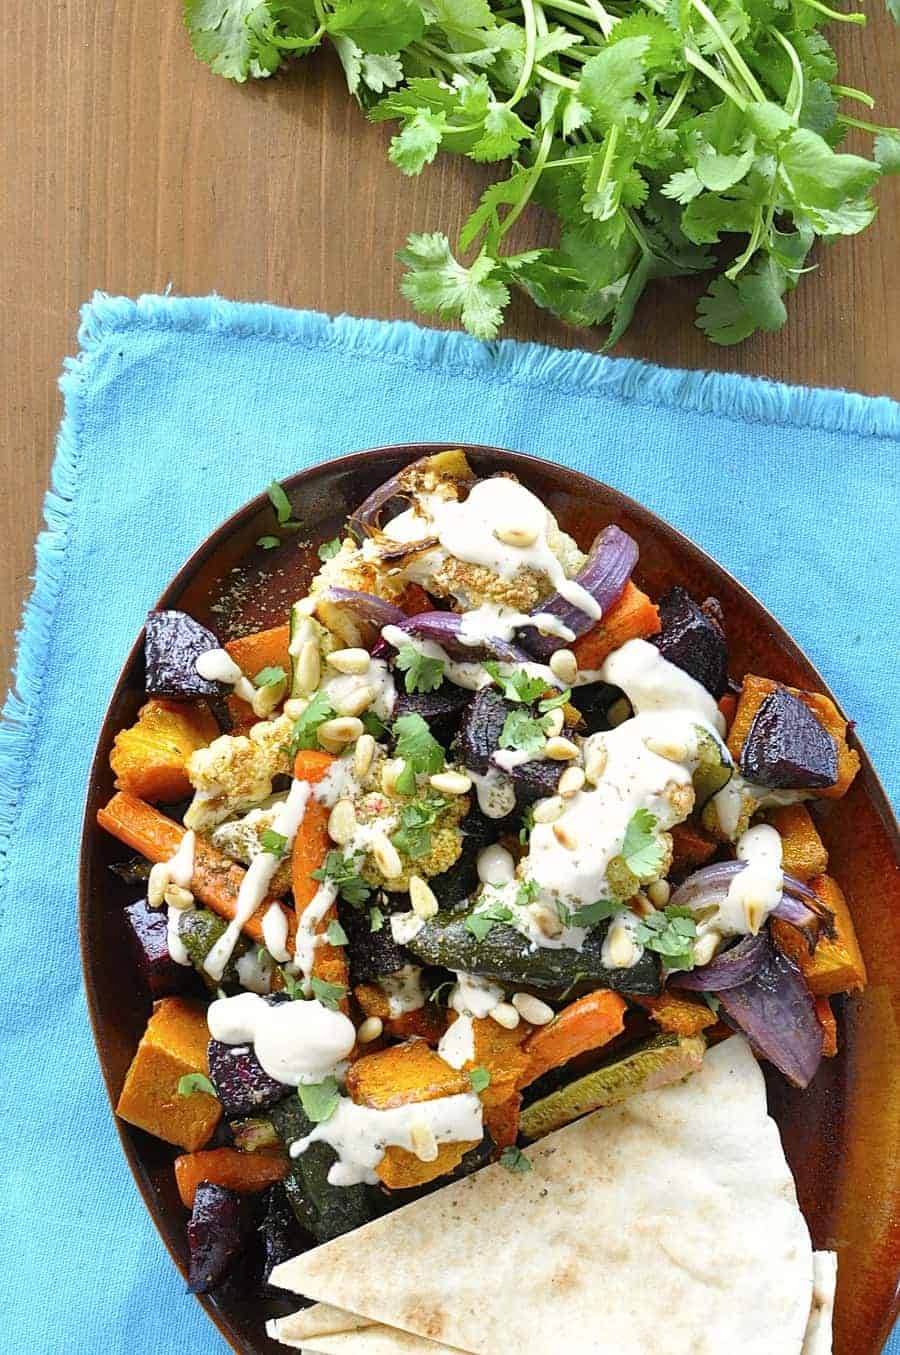 Middle Eastern Roasted Vegetables with Tahini Sauce {Vegan} - great way to use up leftover veggies, insanely simple, fabulous sauce!